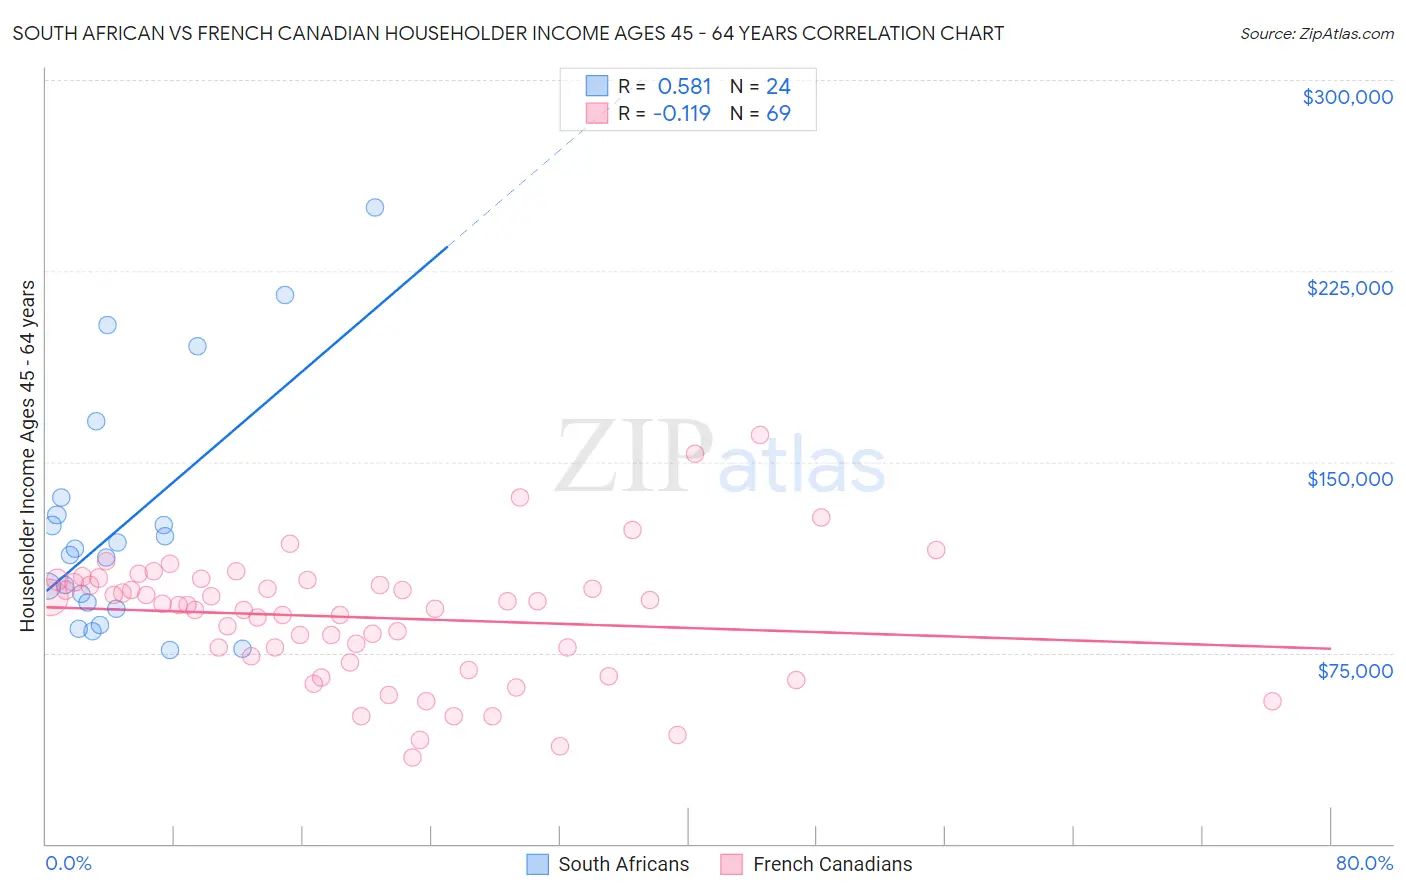 South African vs French Canadian Householder Income Ages 45 - 64 years